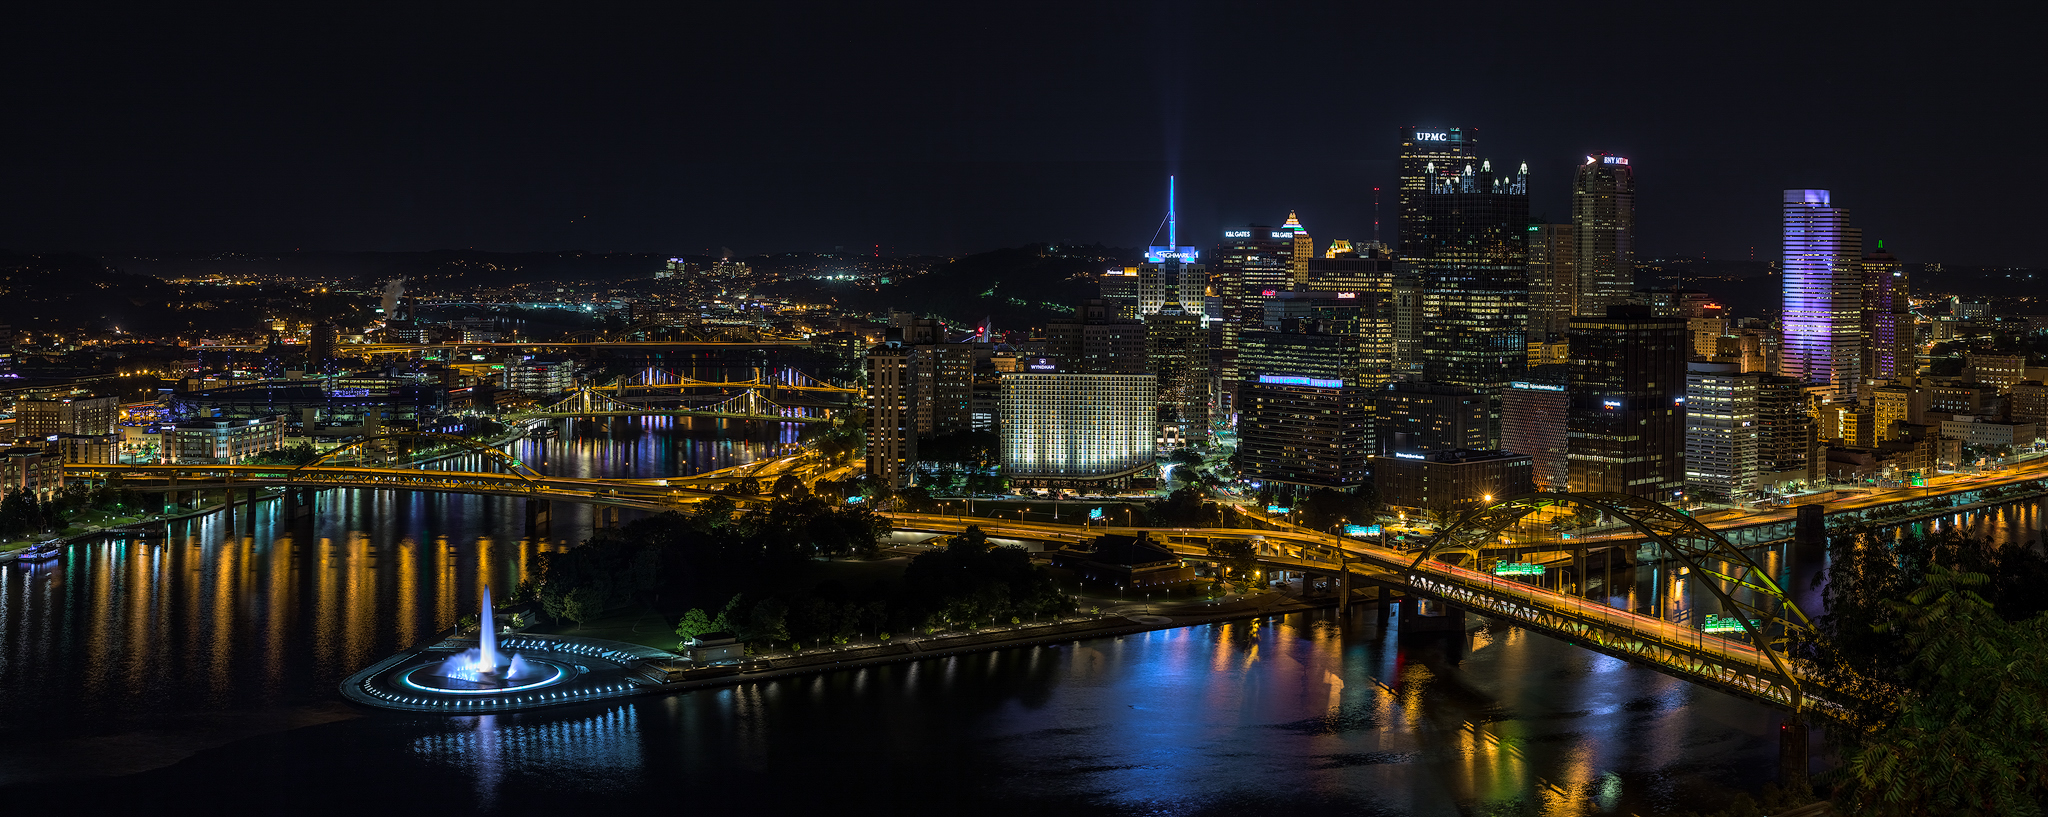 Pittsburgh Sky Line At Night